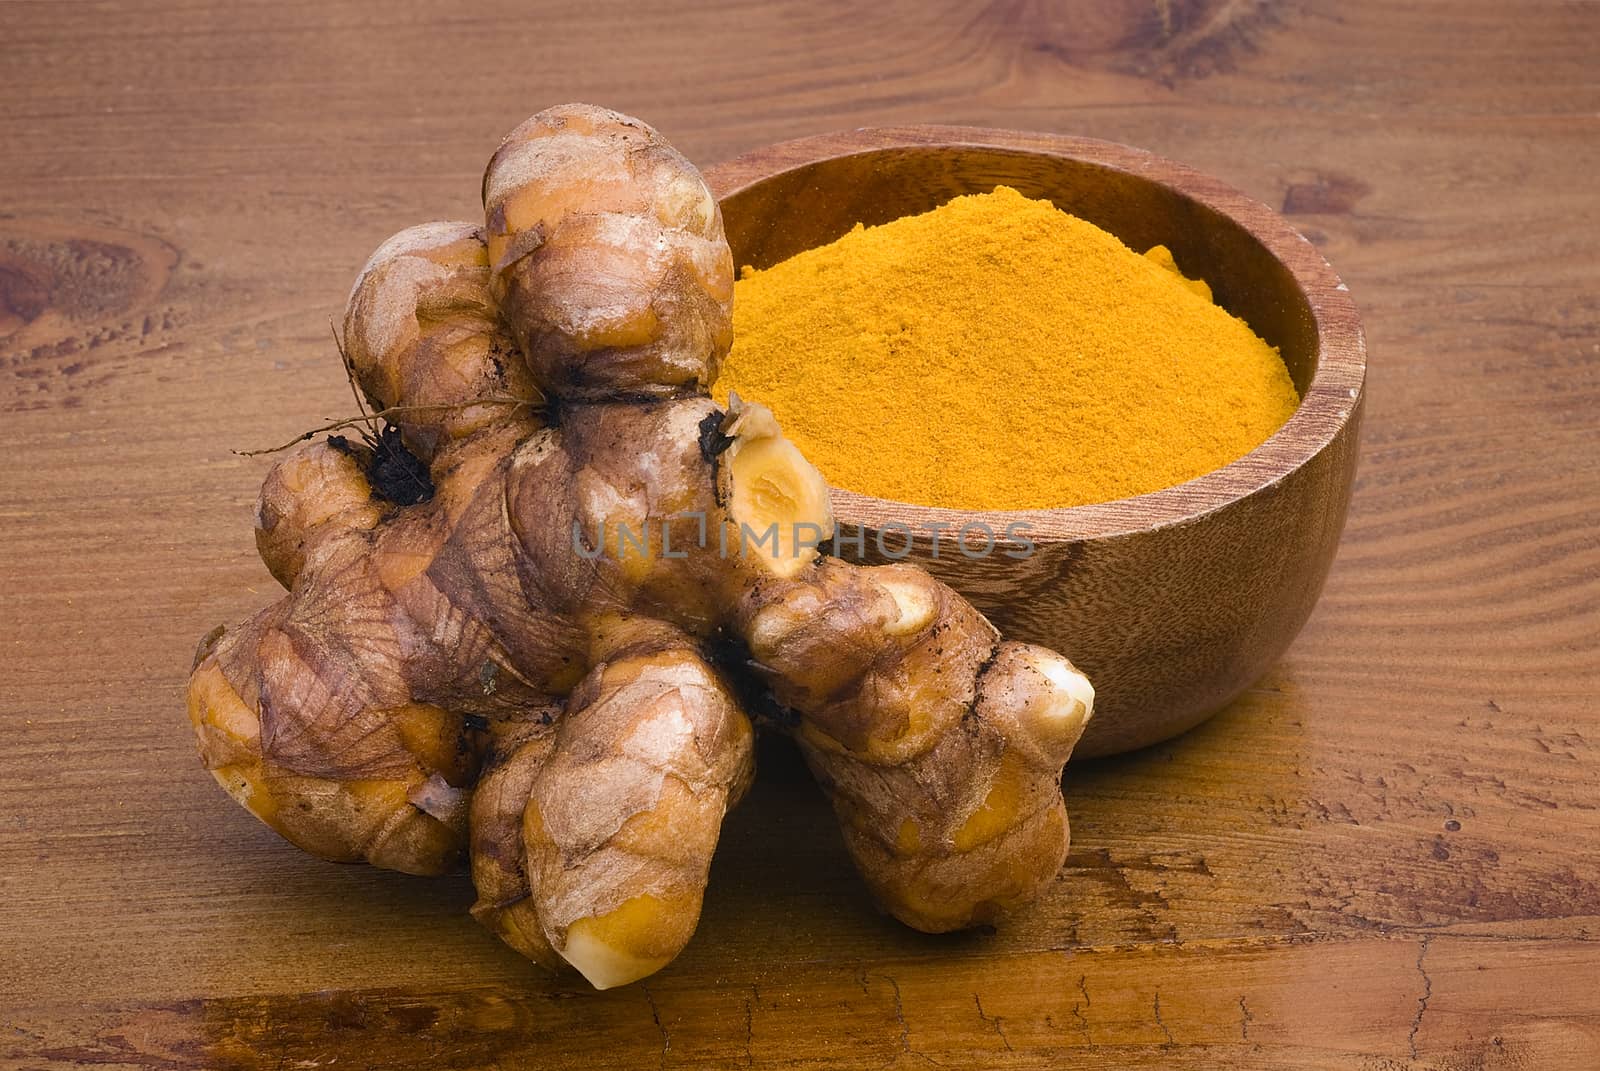 Turmeric (Curcuma longa) is a tropical plant in the same family as ginger, native to India, and cultivated throughout the tropics around the world. The spice of an intense yellow color is an essential ingredient in many recipes oriental cooking.